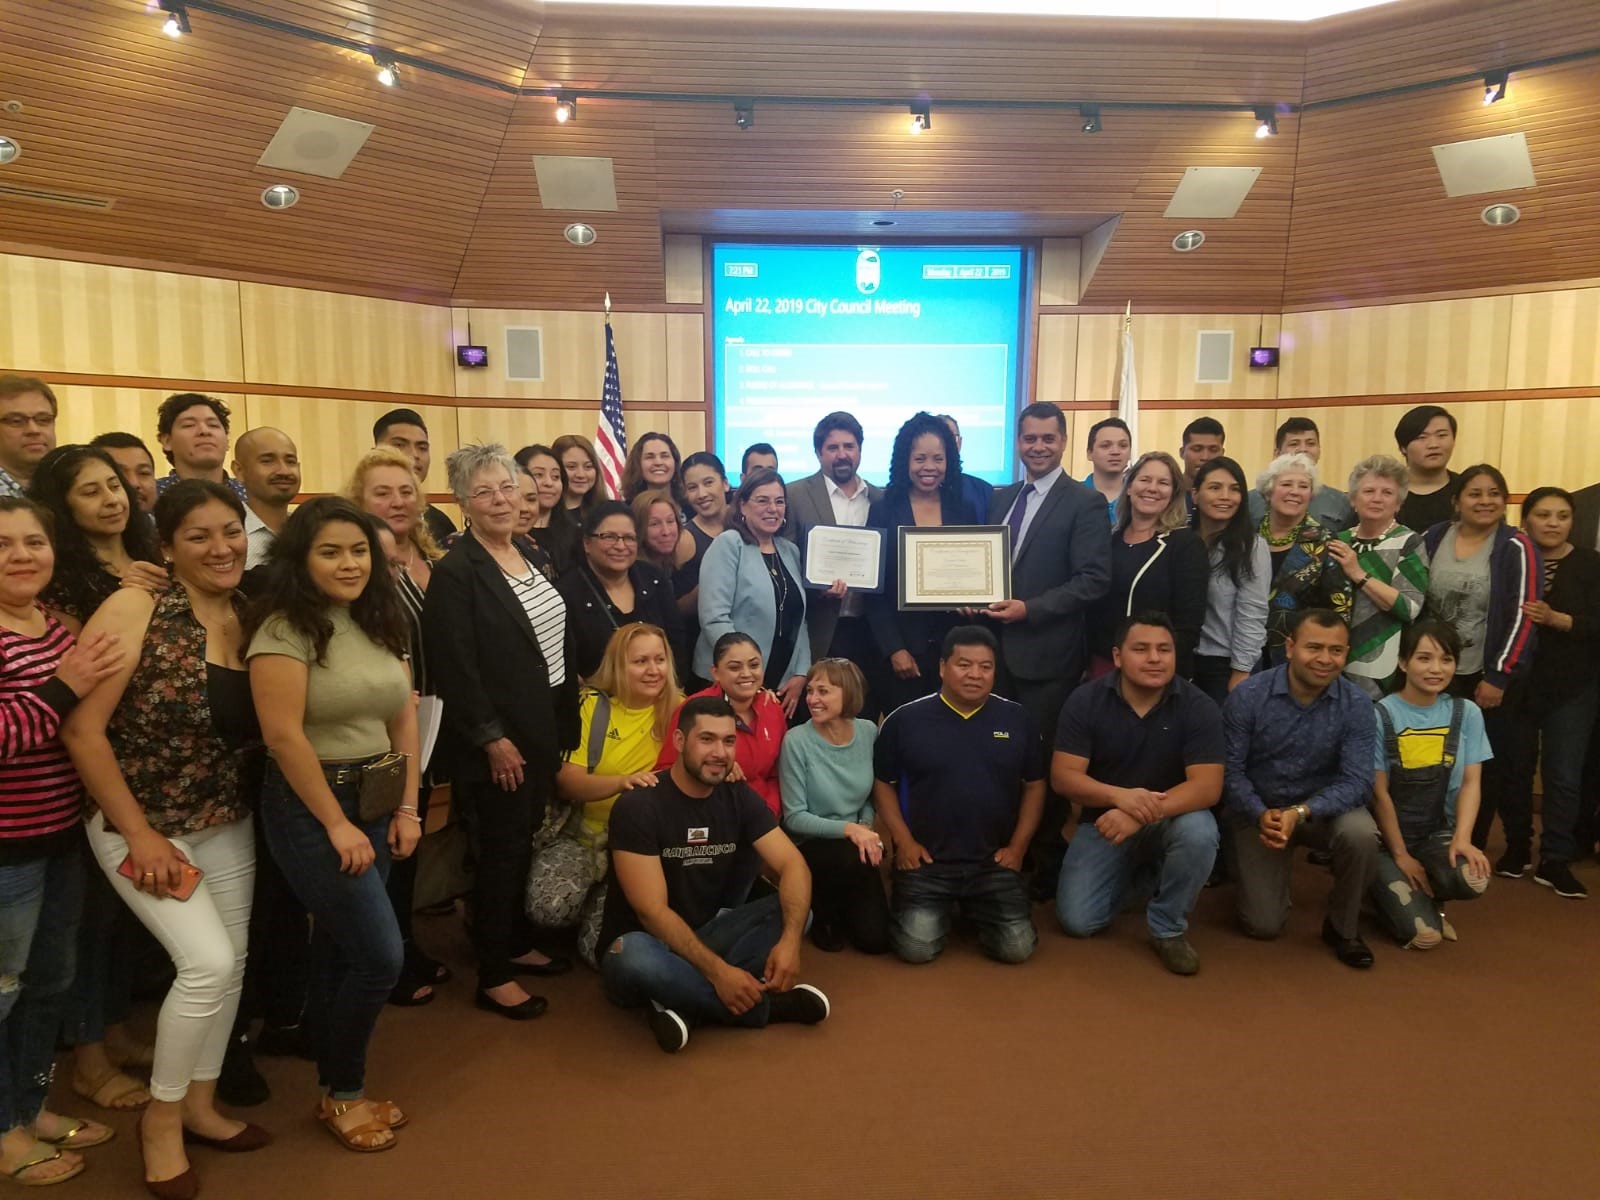 ESL Department Honored at City Council